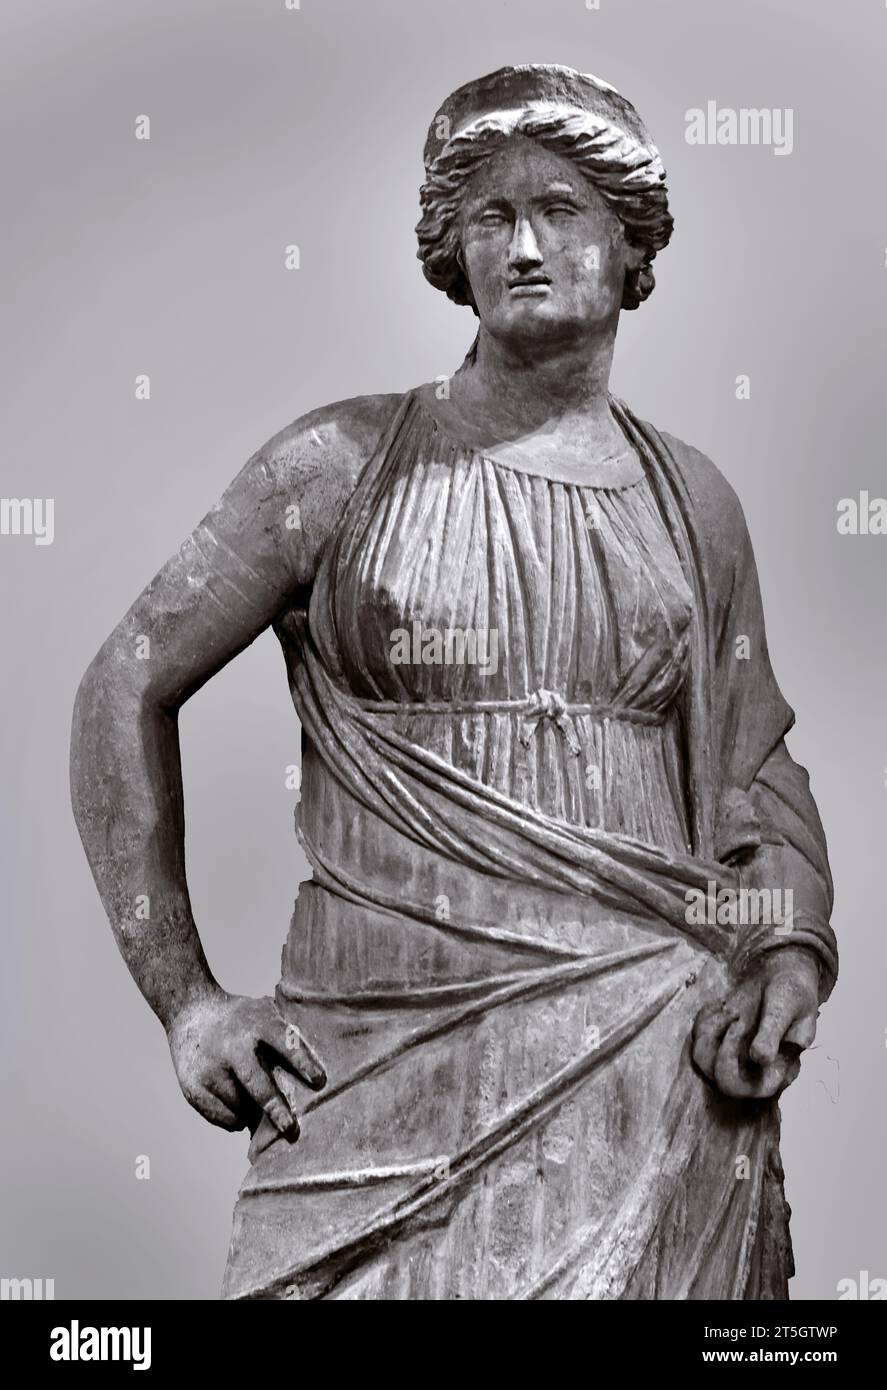 Female Deity identified as Venus protected deity of the dictator Lucius Cornelius Sulla   1st Century AD  Lucius Cornelius Sulla Felix commonly known as Sulla, was a Roman general and statesman. He won the first large-scale civil war in Roman                               National Archaeological Museum of Naples Italy. Stock Photo